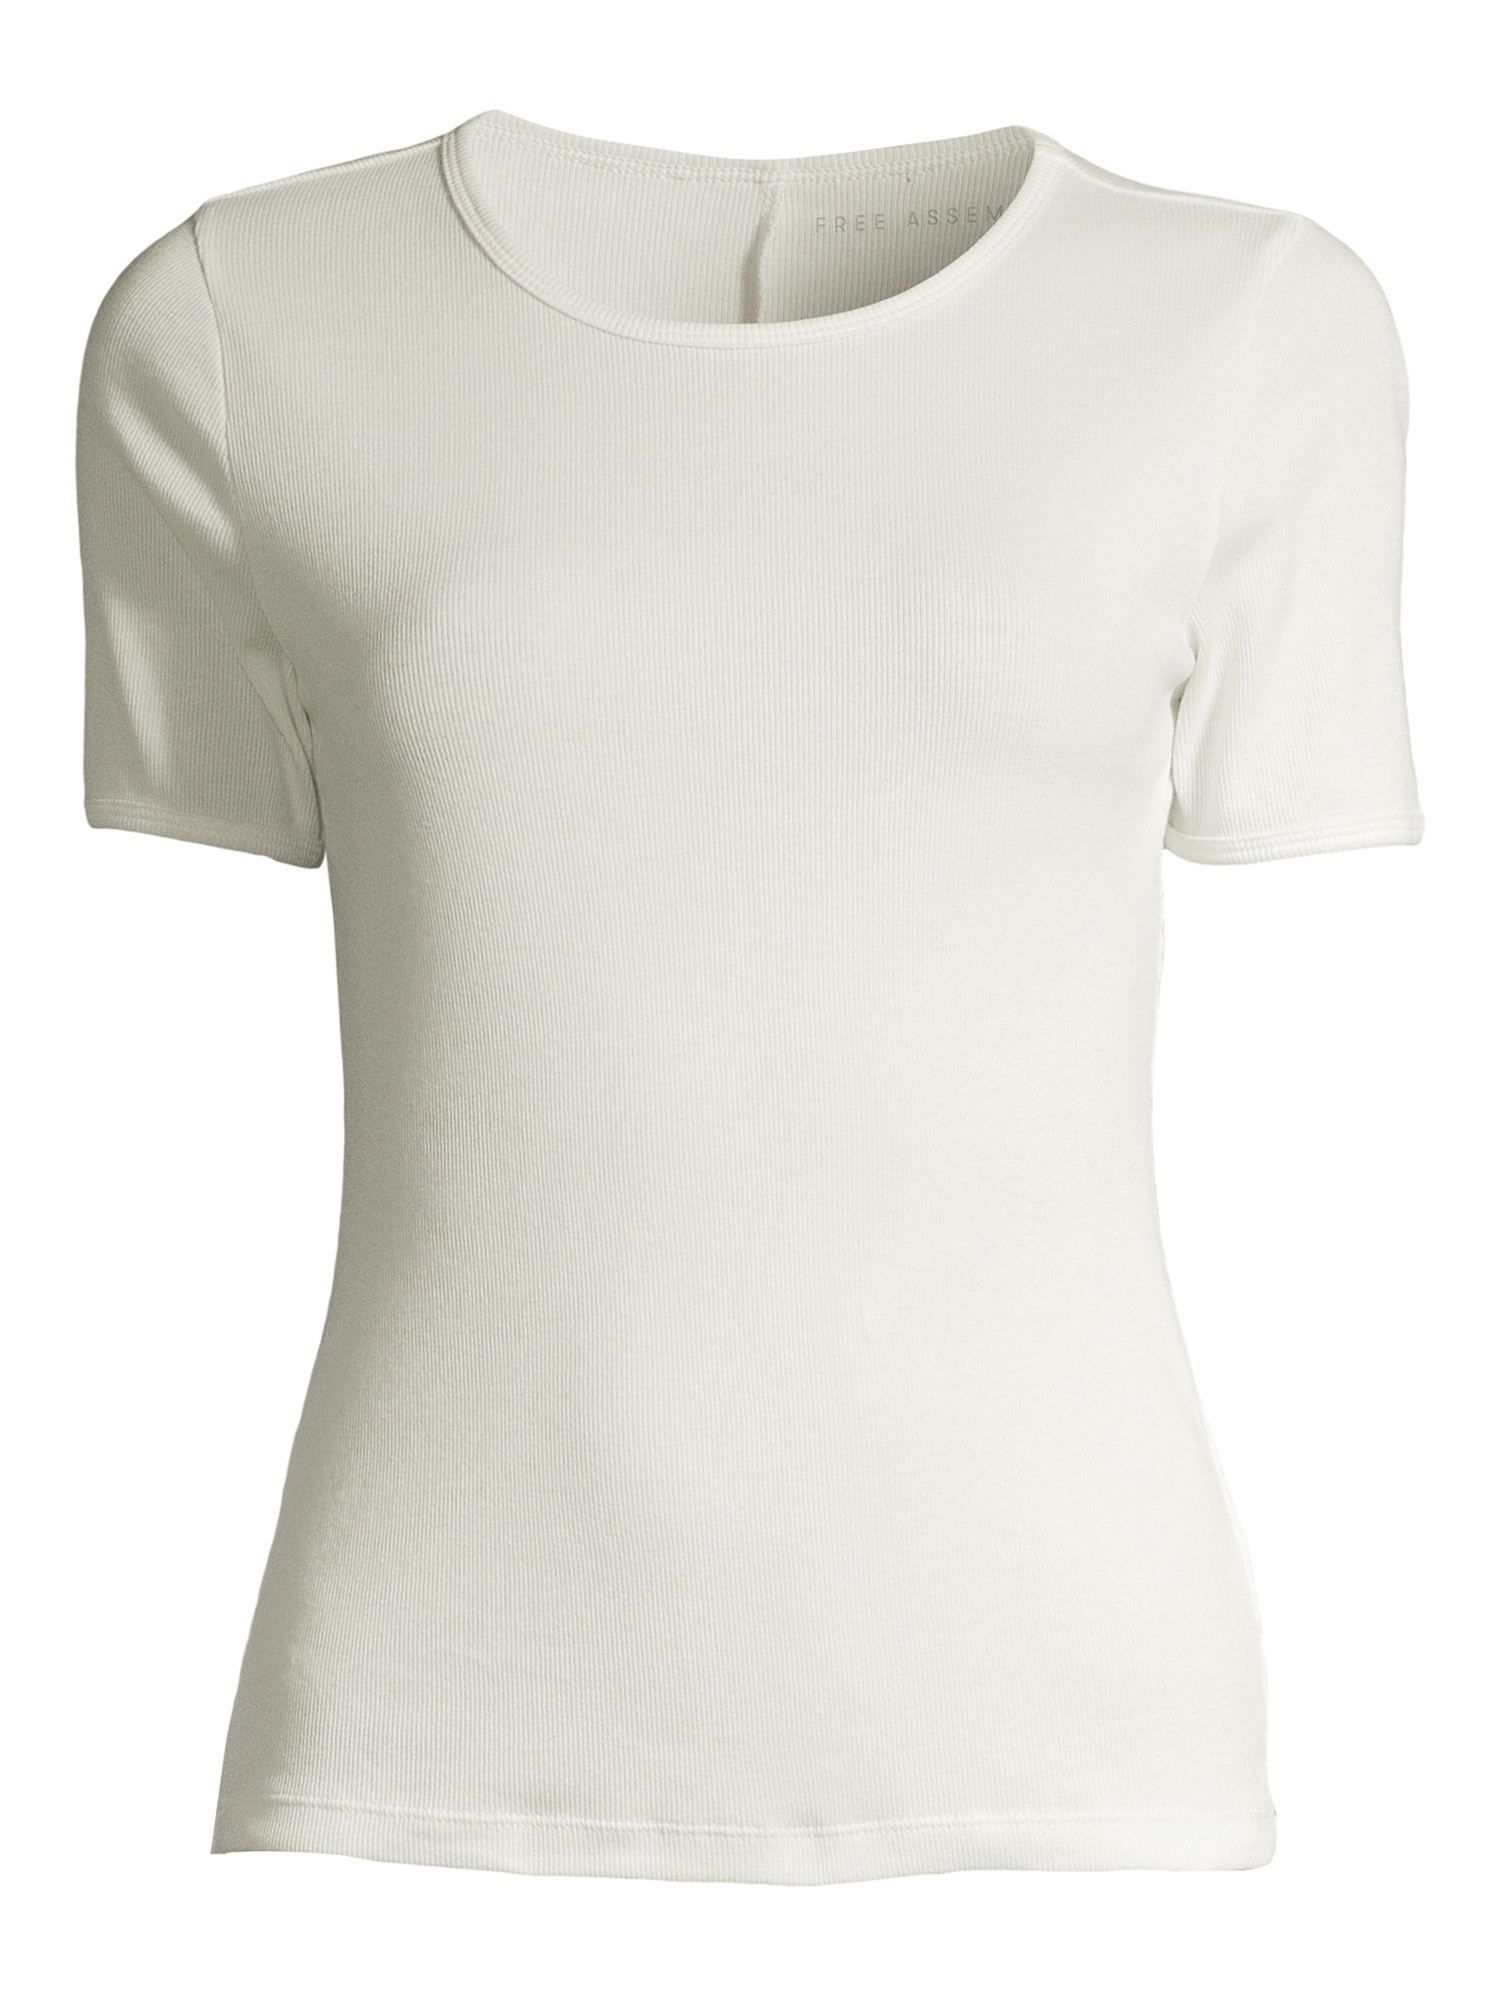 Free Assembly Women's Ribbed Crewneck Tee with Short Sleeves, Sizes XS-XXXL - image 4 of 9